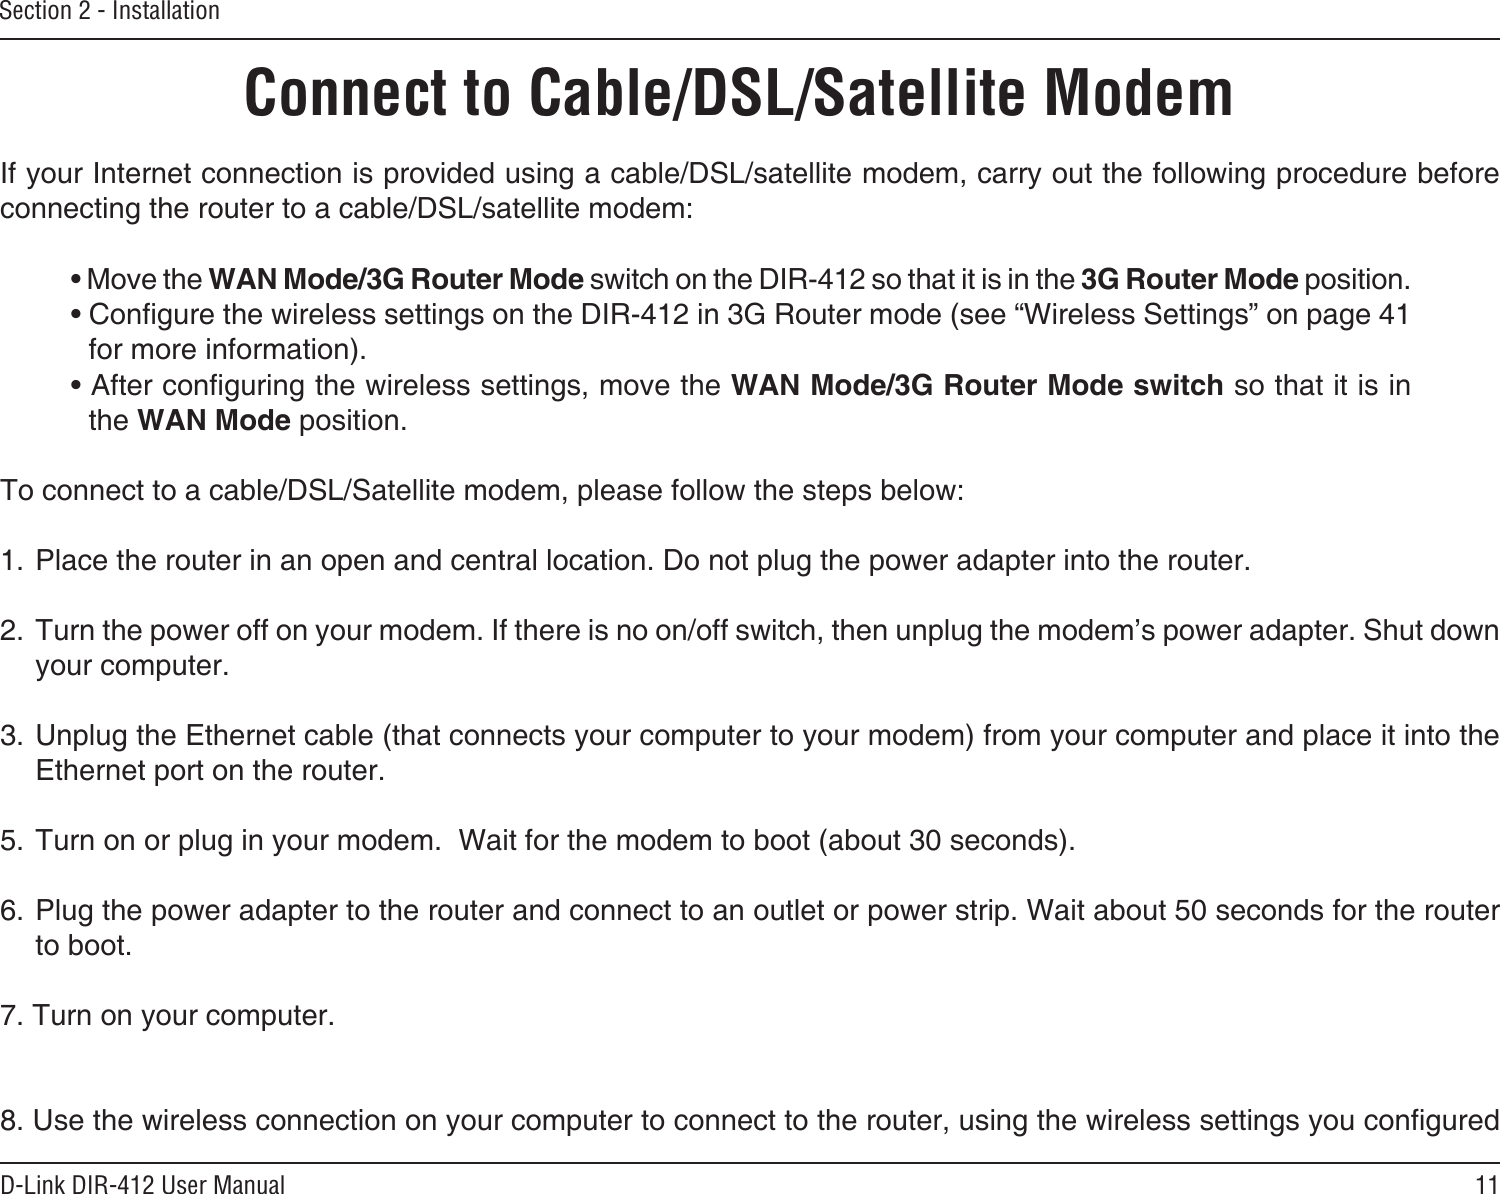 11D-Link DIR-412 User ManualSection 2 - InstallationIf your Internet connection is provided using a cable/DSL/satellite modem, carry out the following procedure before connecting the router to a cable/DSL/satellite modem:• Move the WAN Mode/3G Router Mode switch on the DIR-412 so that it is in the 3G Router Mode position.• Congure the wireless settings on the DIR-412 in 3G Router mode (see “Wireless Settings” on page 41 for more information).• After conguring the wireless settings, move the WAN Mode/3G Router Mode switch so that it is in the WAN Mode position.To connect to a cable/DSL/Satellite modem, please follow the steps below:1. Place the router in an open and central location. Do not plug the power adapter into the router. 2. Turn the power off on your modem. If there is no on/off switch, then unplug the modem’s power adapter. Shut down your computer.3. Unplug the Ethernet cable (that connects your computer to your modem) from your computer and place it into the Ethernet port on the router.  5. Turn on or plug in your modem.  Wait for the modem to boot (about 30 seconds). 6. Plug the power adapter to the router and connect to an outlet or power strip. Wait about 50 seconds for the router to boot. 7. Turn on your computer. 8. Use the wireless connection on your computer to connect to the router, using the wireless settings you congured Connect to Cable/DSL/Satellite Modem